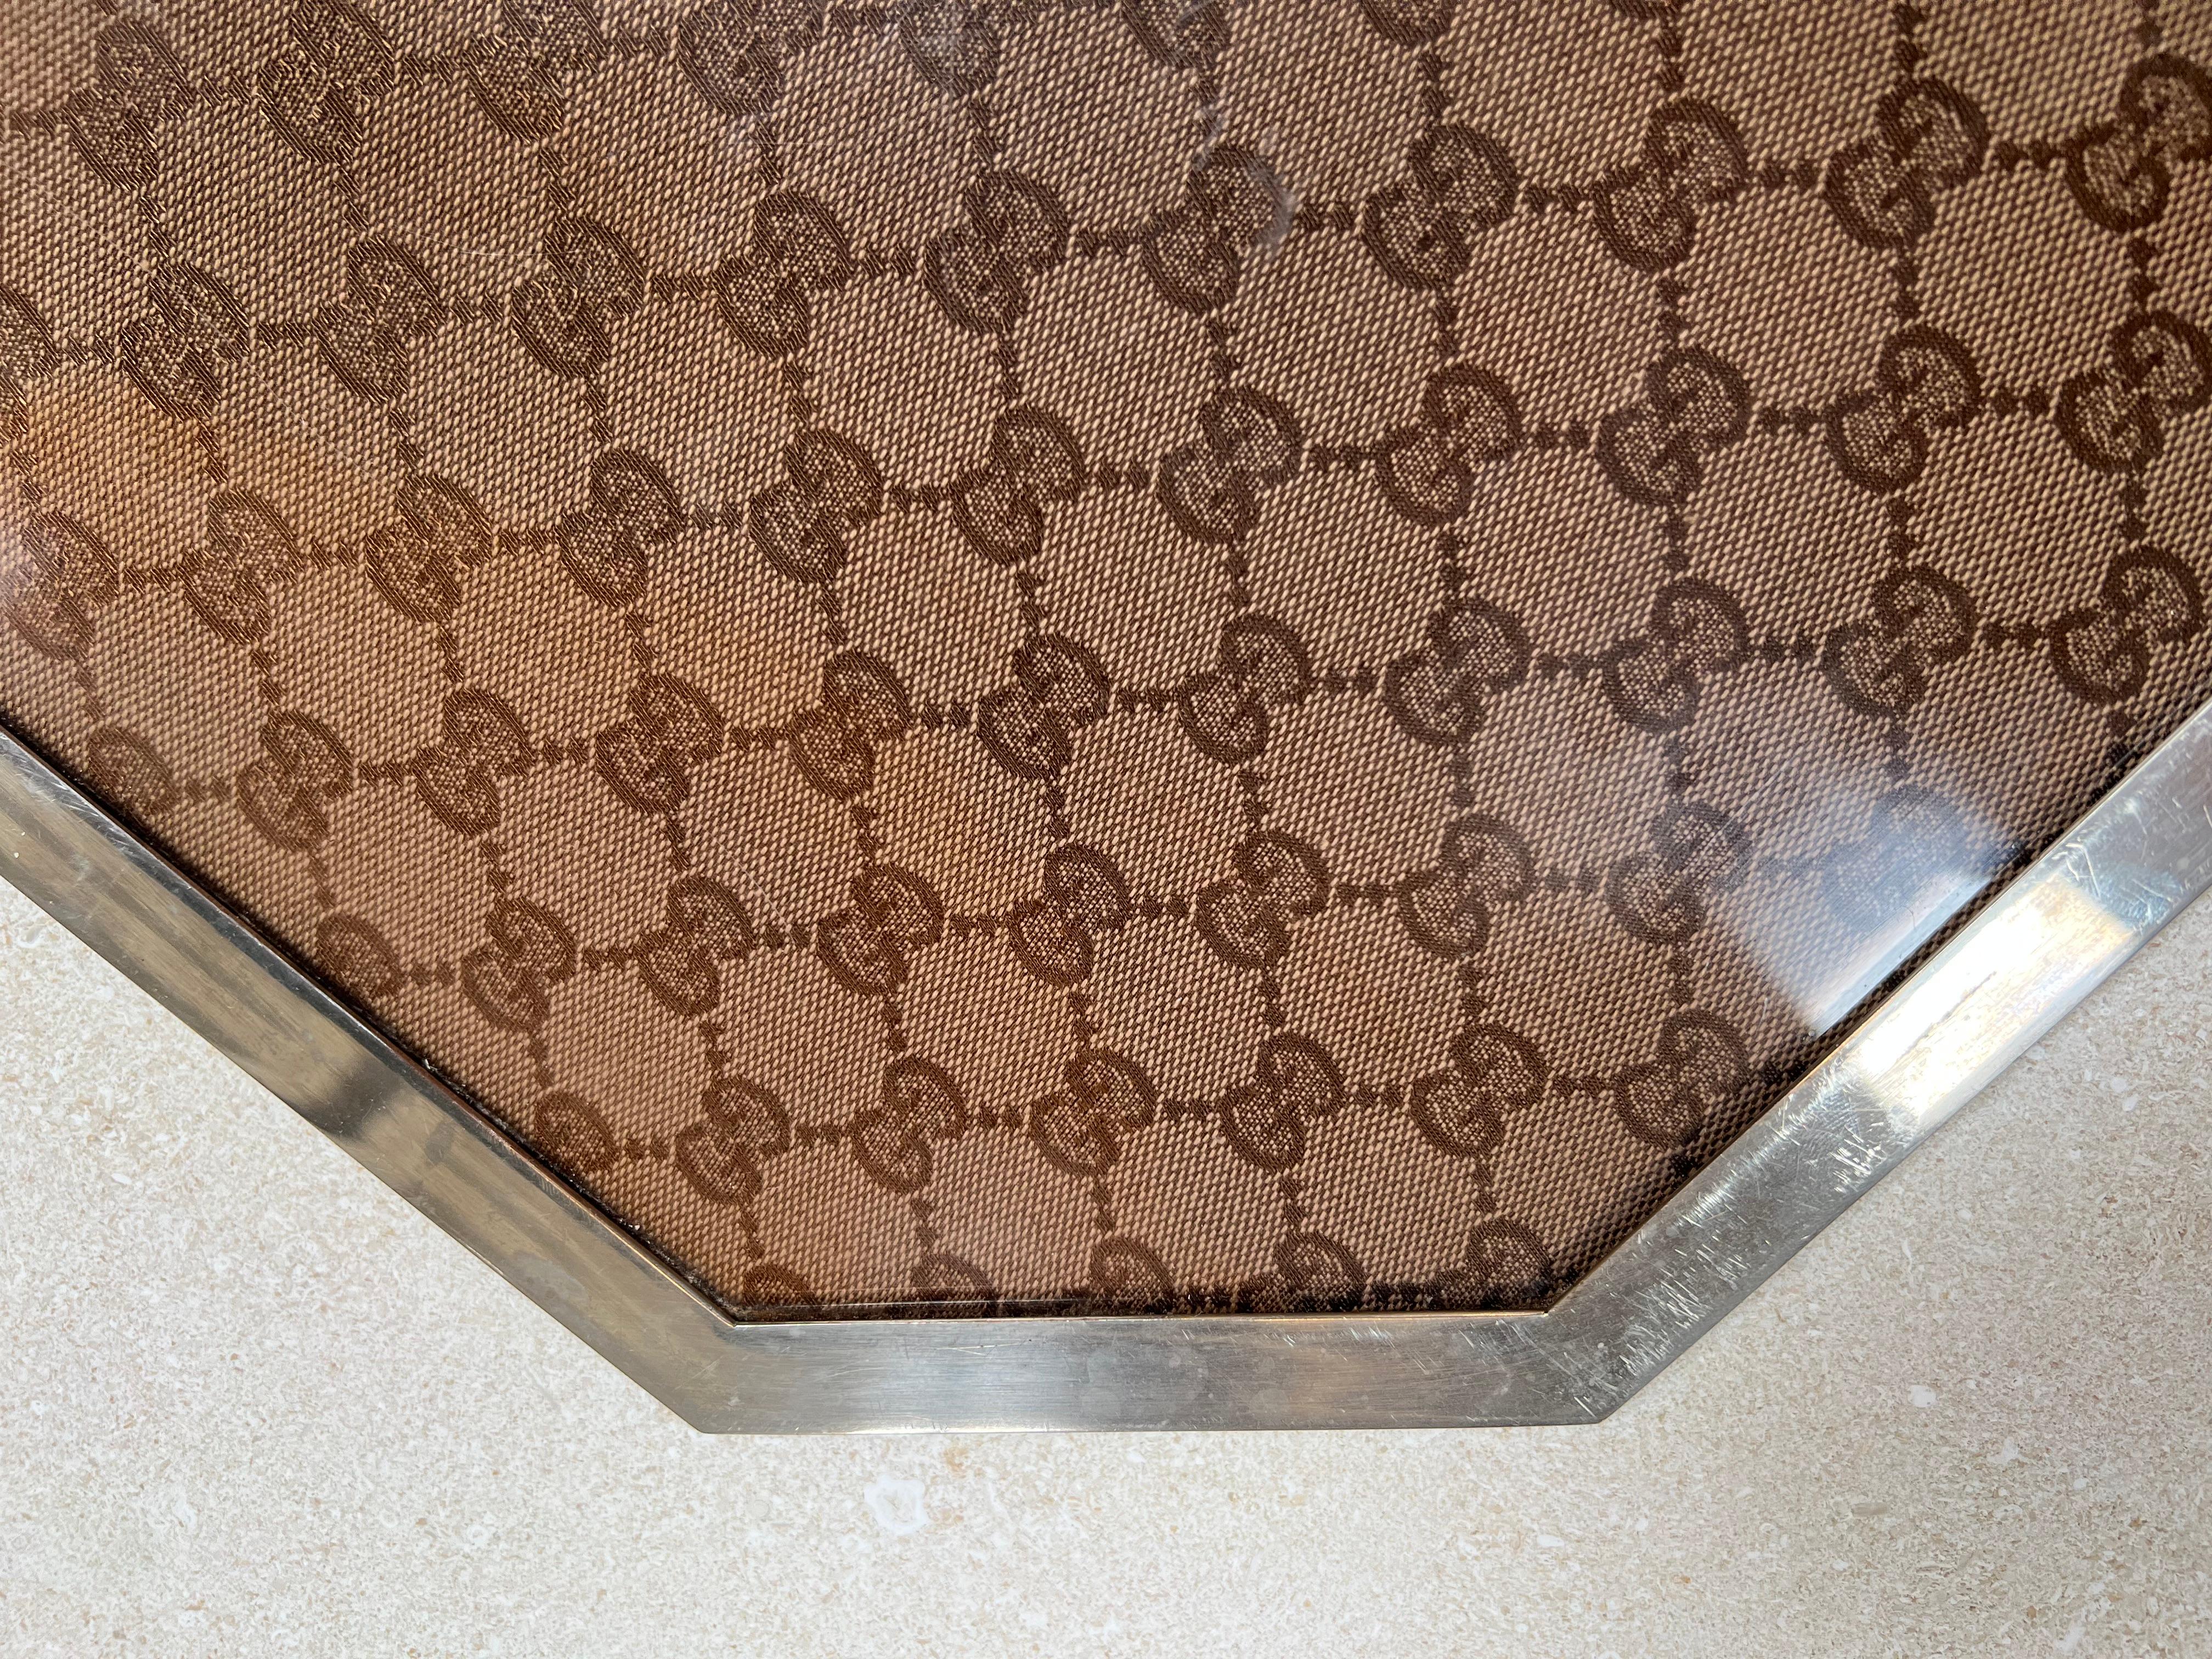 The Vintage Italian Gucci Tray from the 1980s is a chic and iconic piece that embodies both luxury and style. Crafted by the renowned fashion house, Gucci, this tray exudes a sense of vintage elegance. Its design showcases the signature Gucci motifs